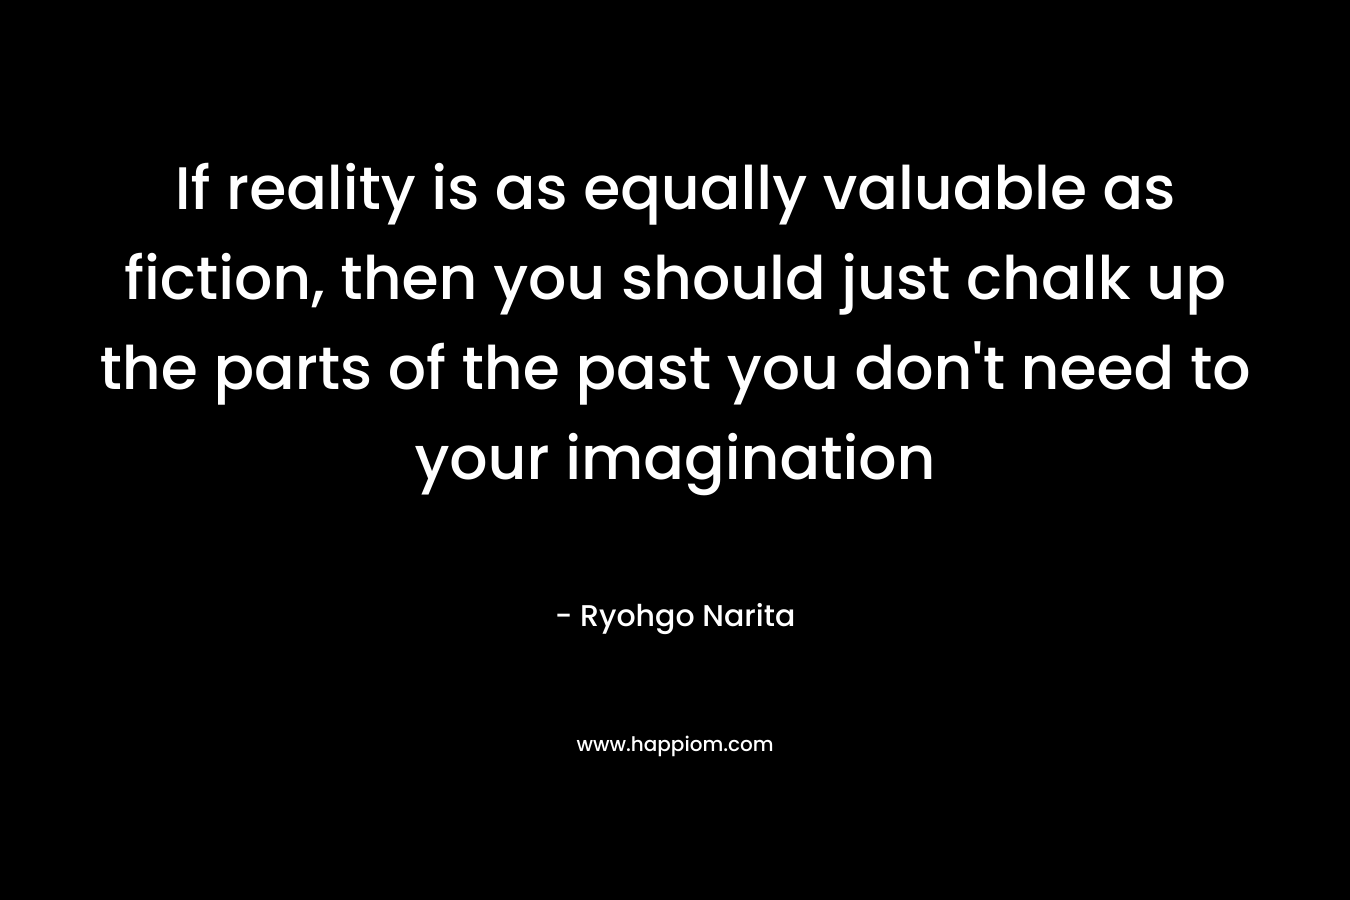 If reality is as equally valuable as fiction, then you should just chalk up the parts of the past you don’t need to your imagination – Ryohgo Narita